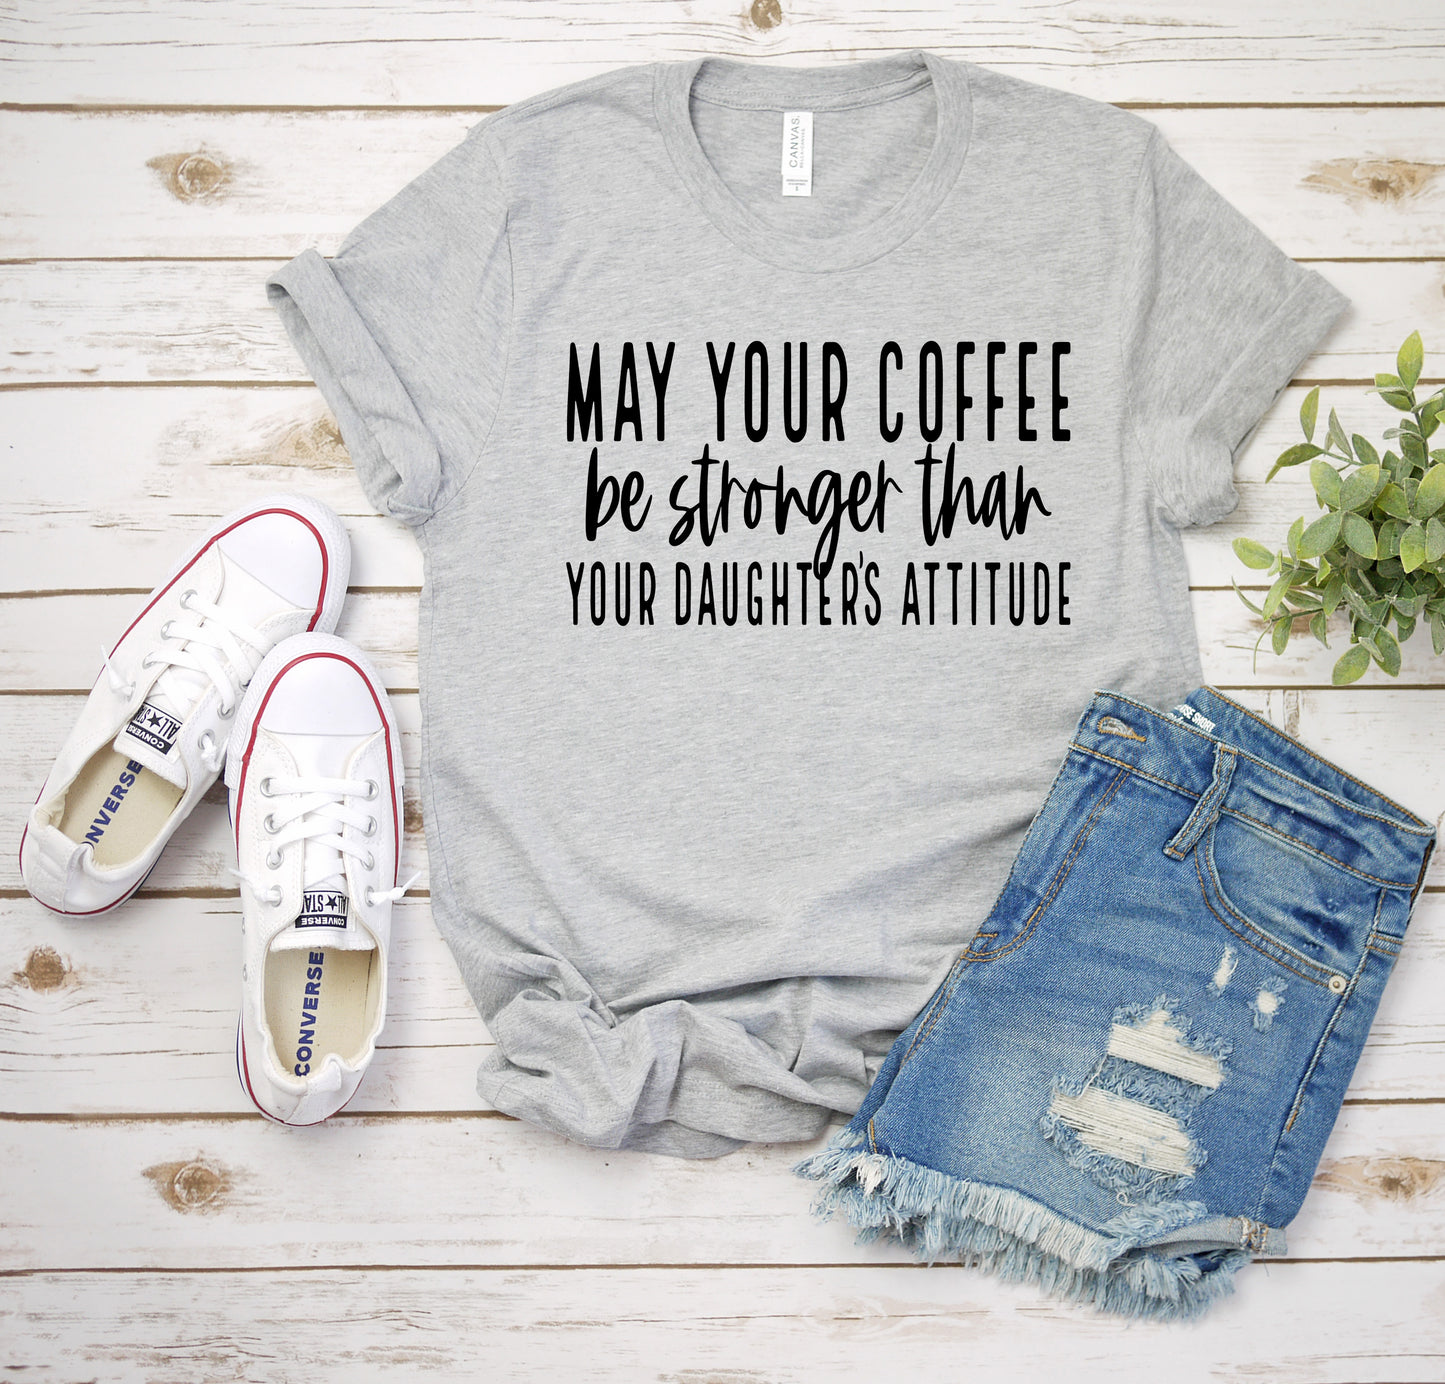 May your coffee be stronger than your daughters attitude